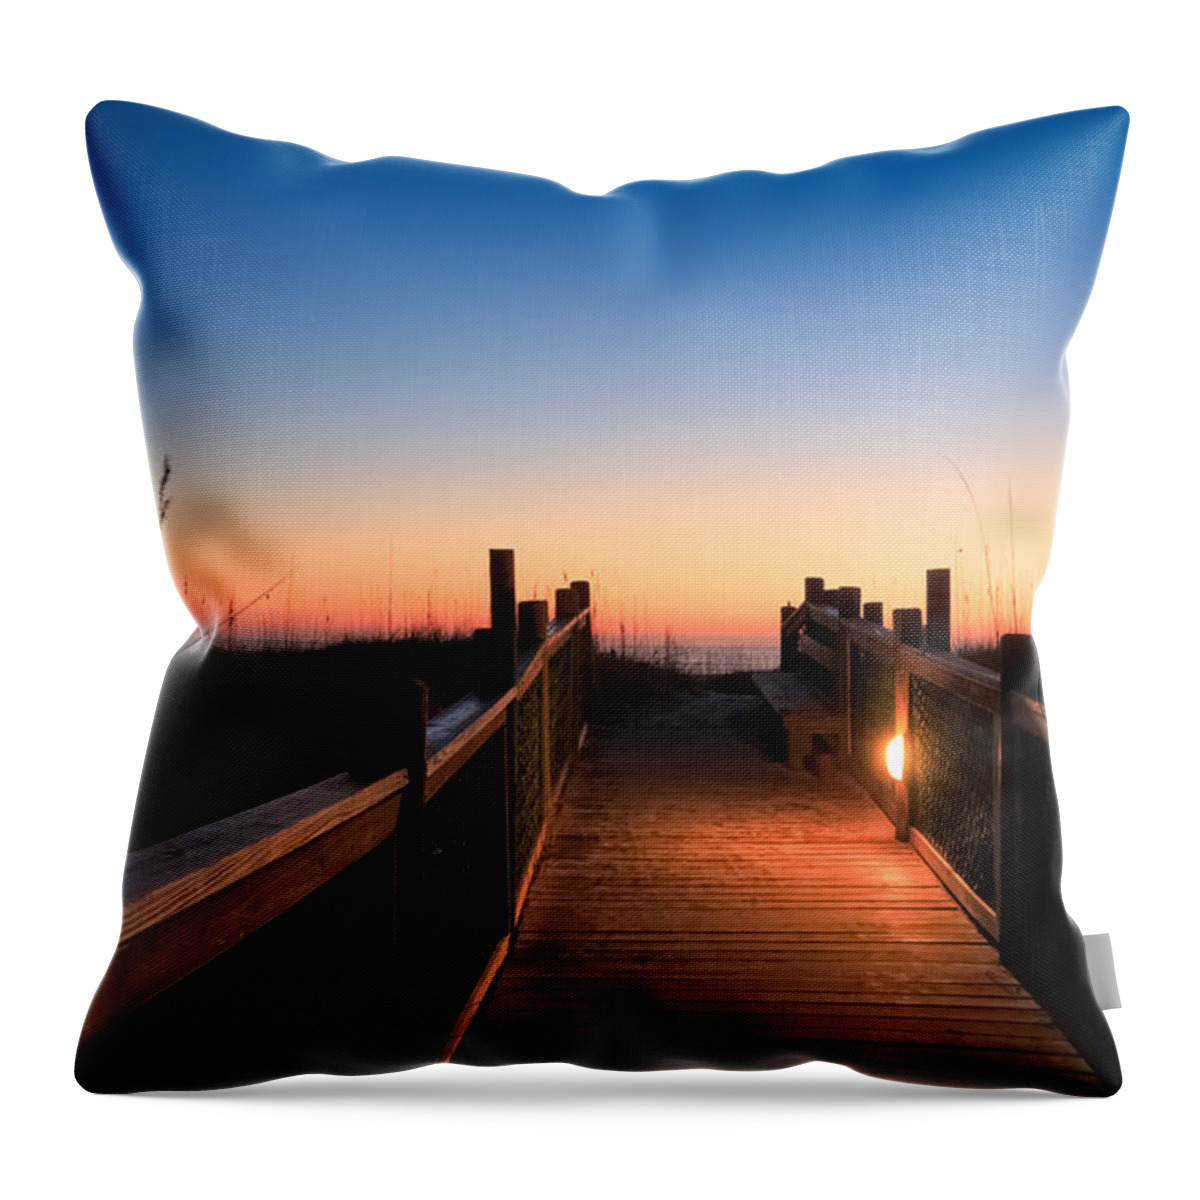 Daybreak Throw Pillow featuring the photograph Path To A New Day by Kathleen Scanlan